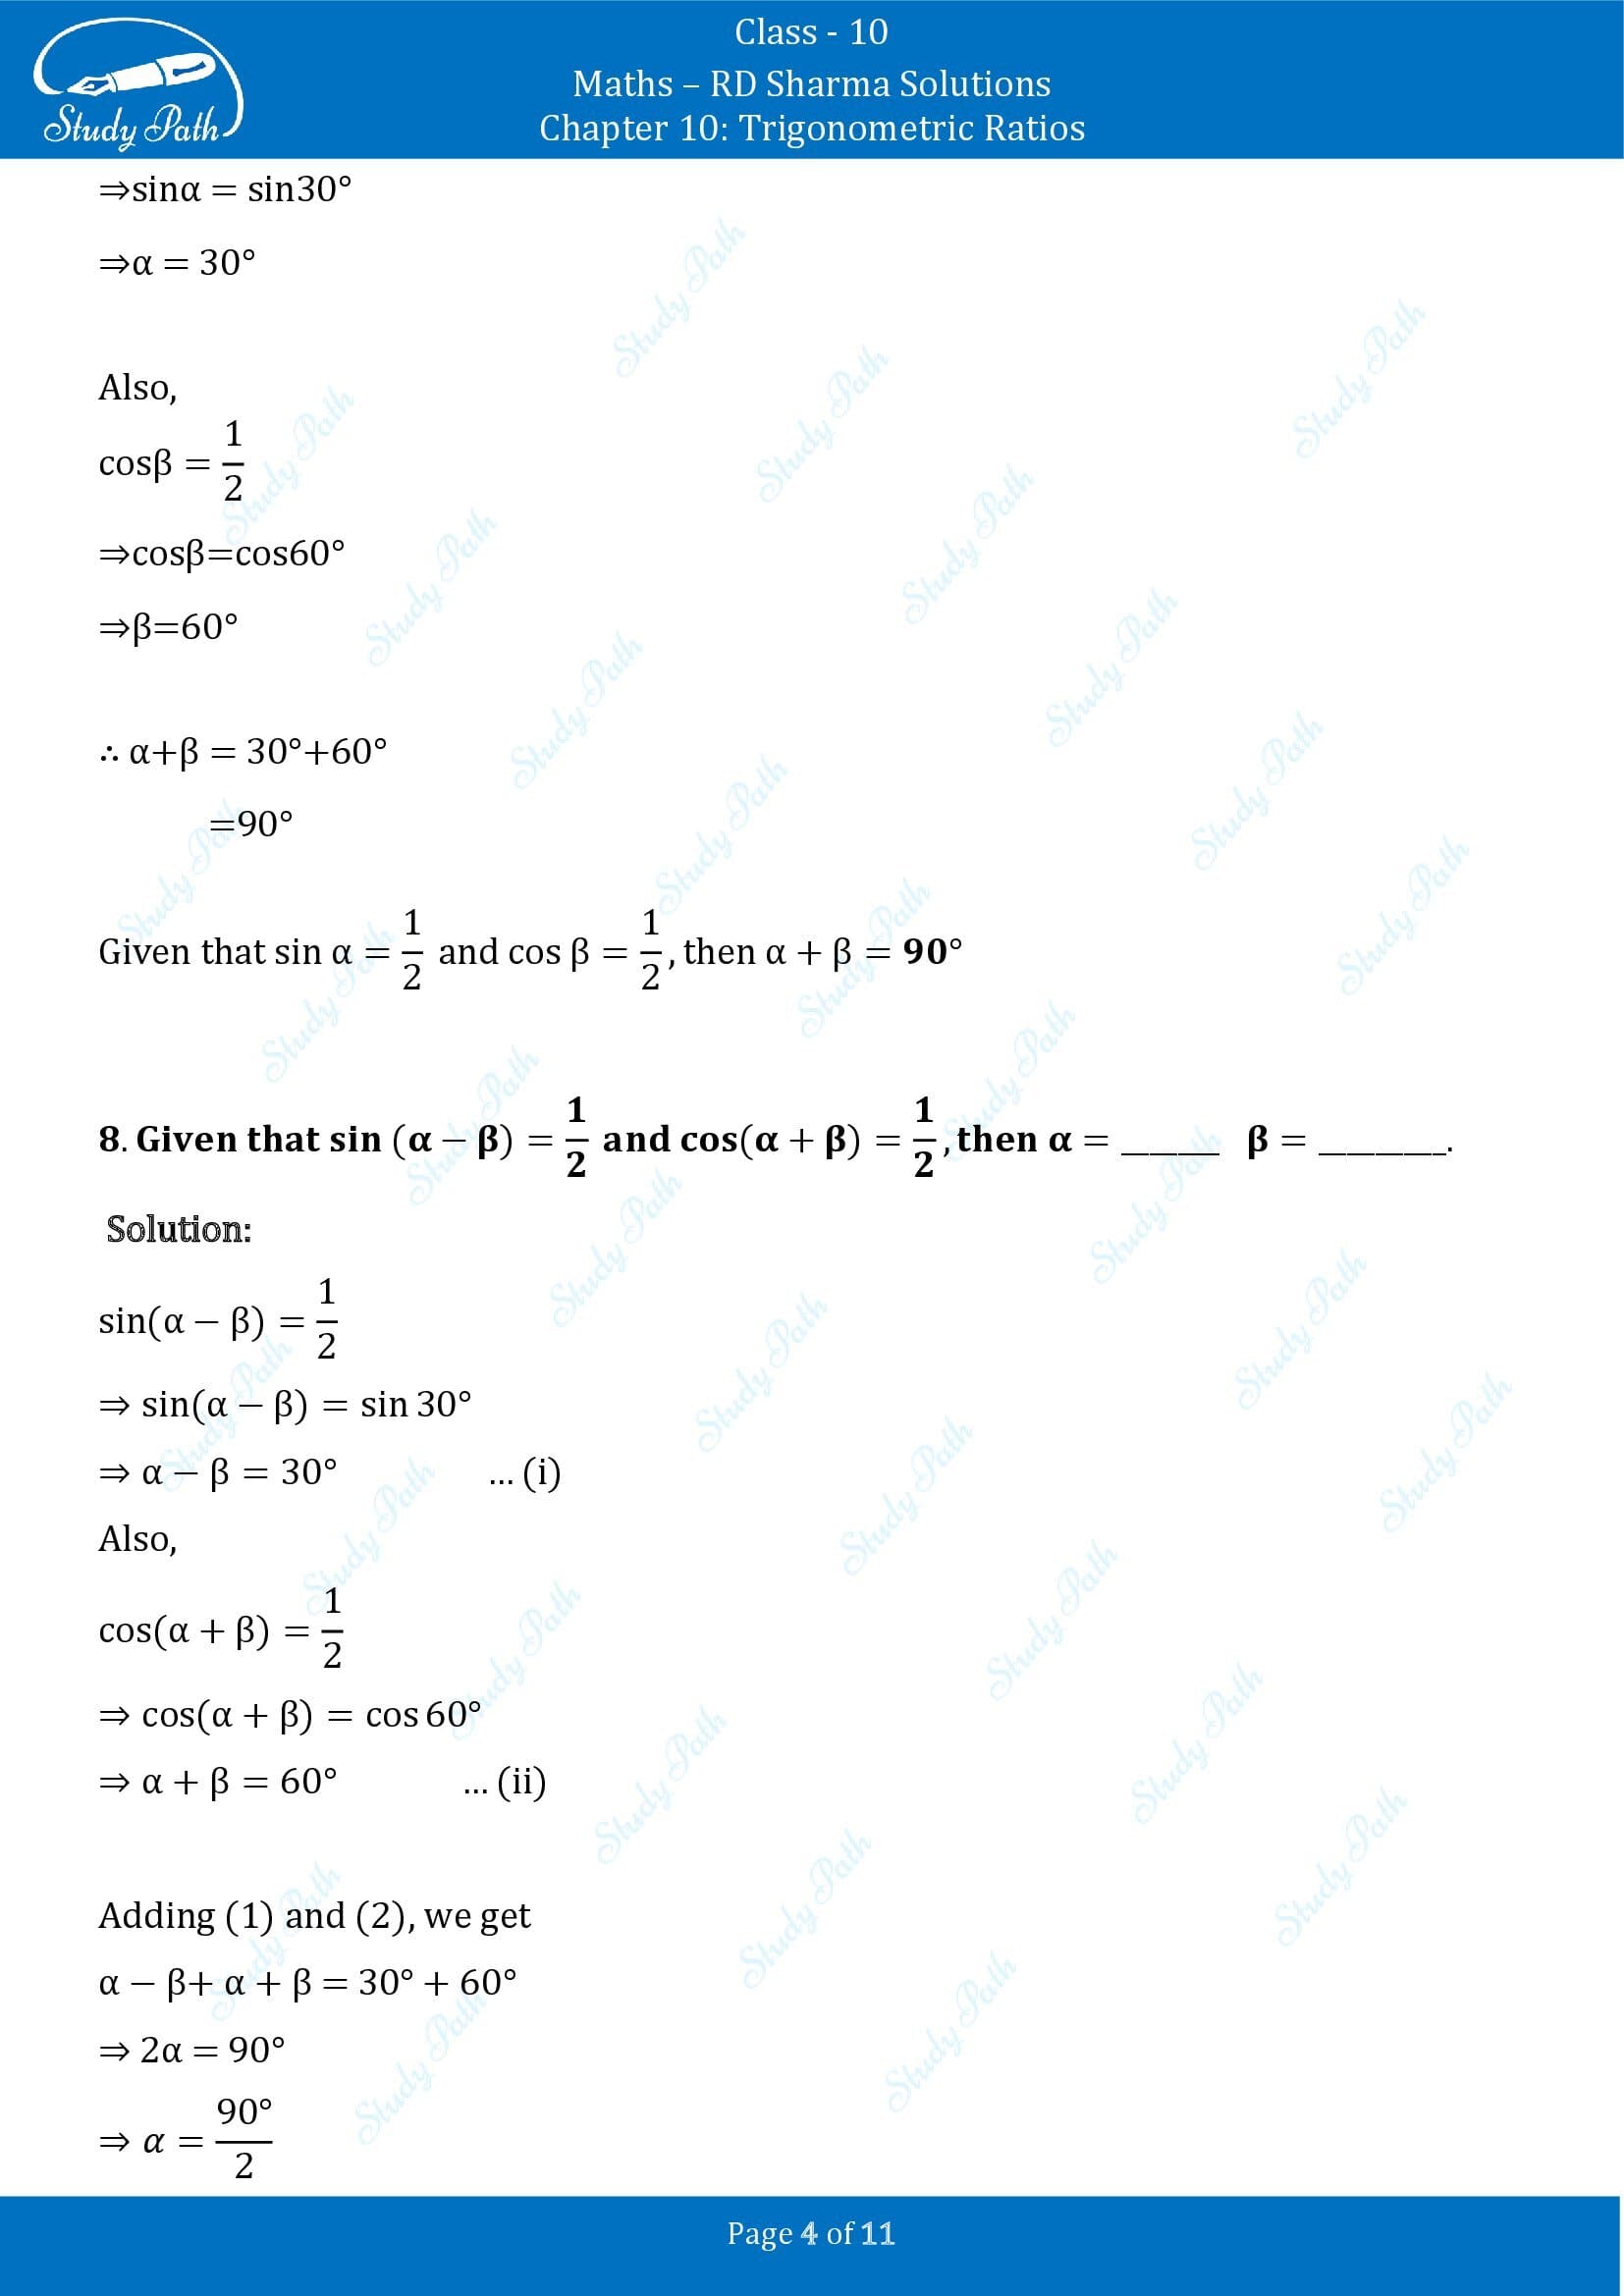 RD Sharma Solutions Class 10 Chapter 10 Trigonometric Ratios Fill in the Blank Type Questions FBQs 00004